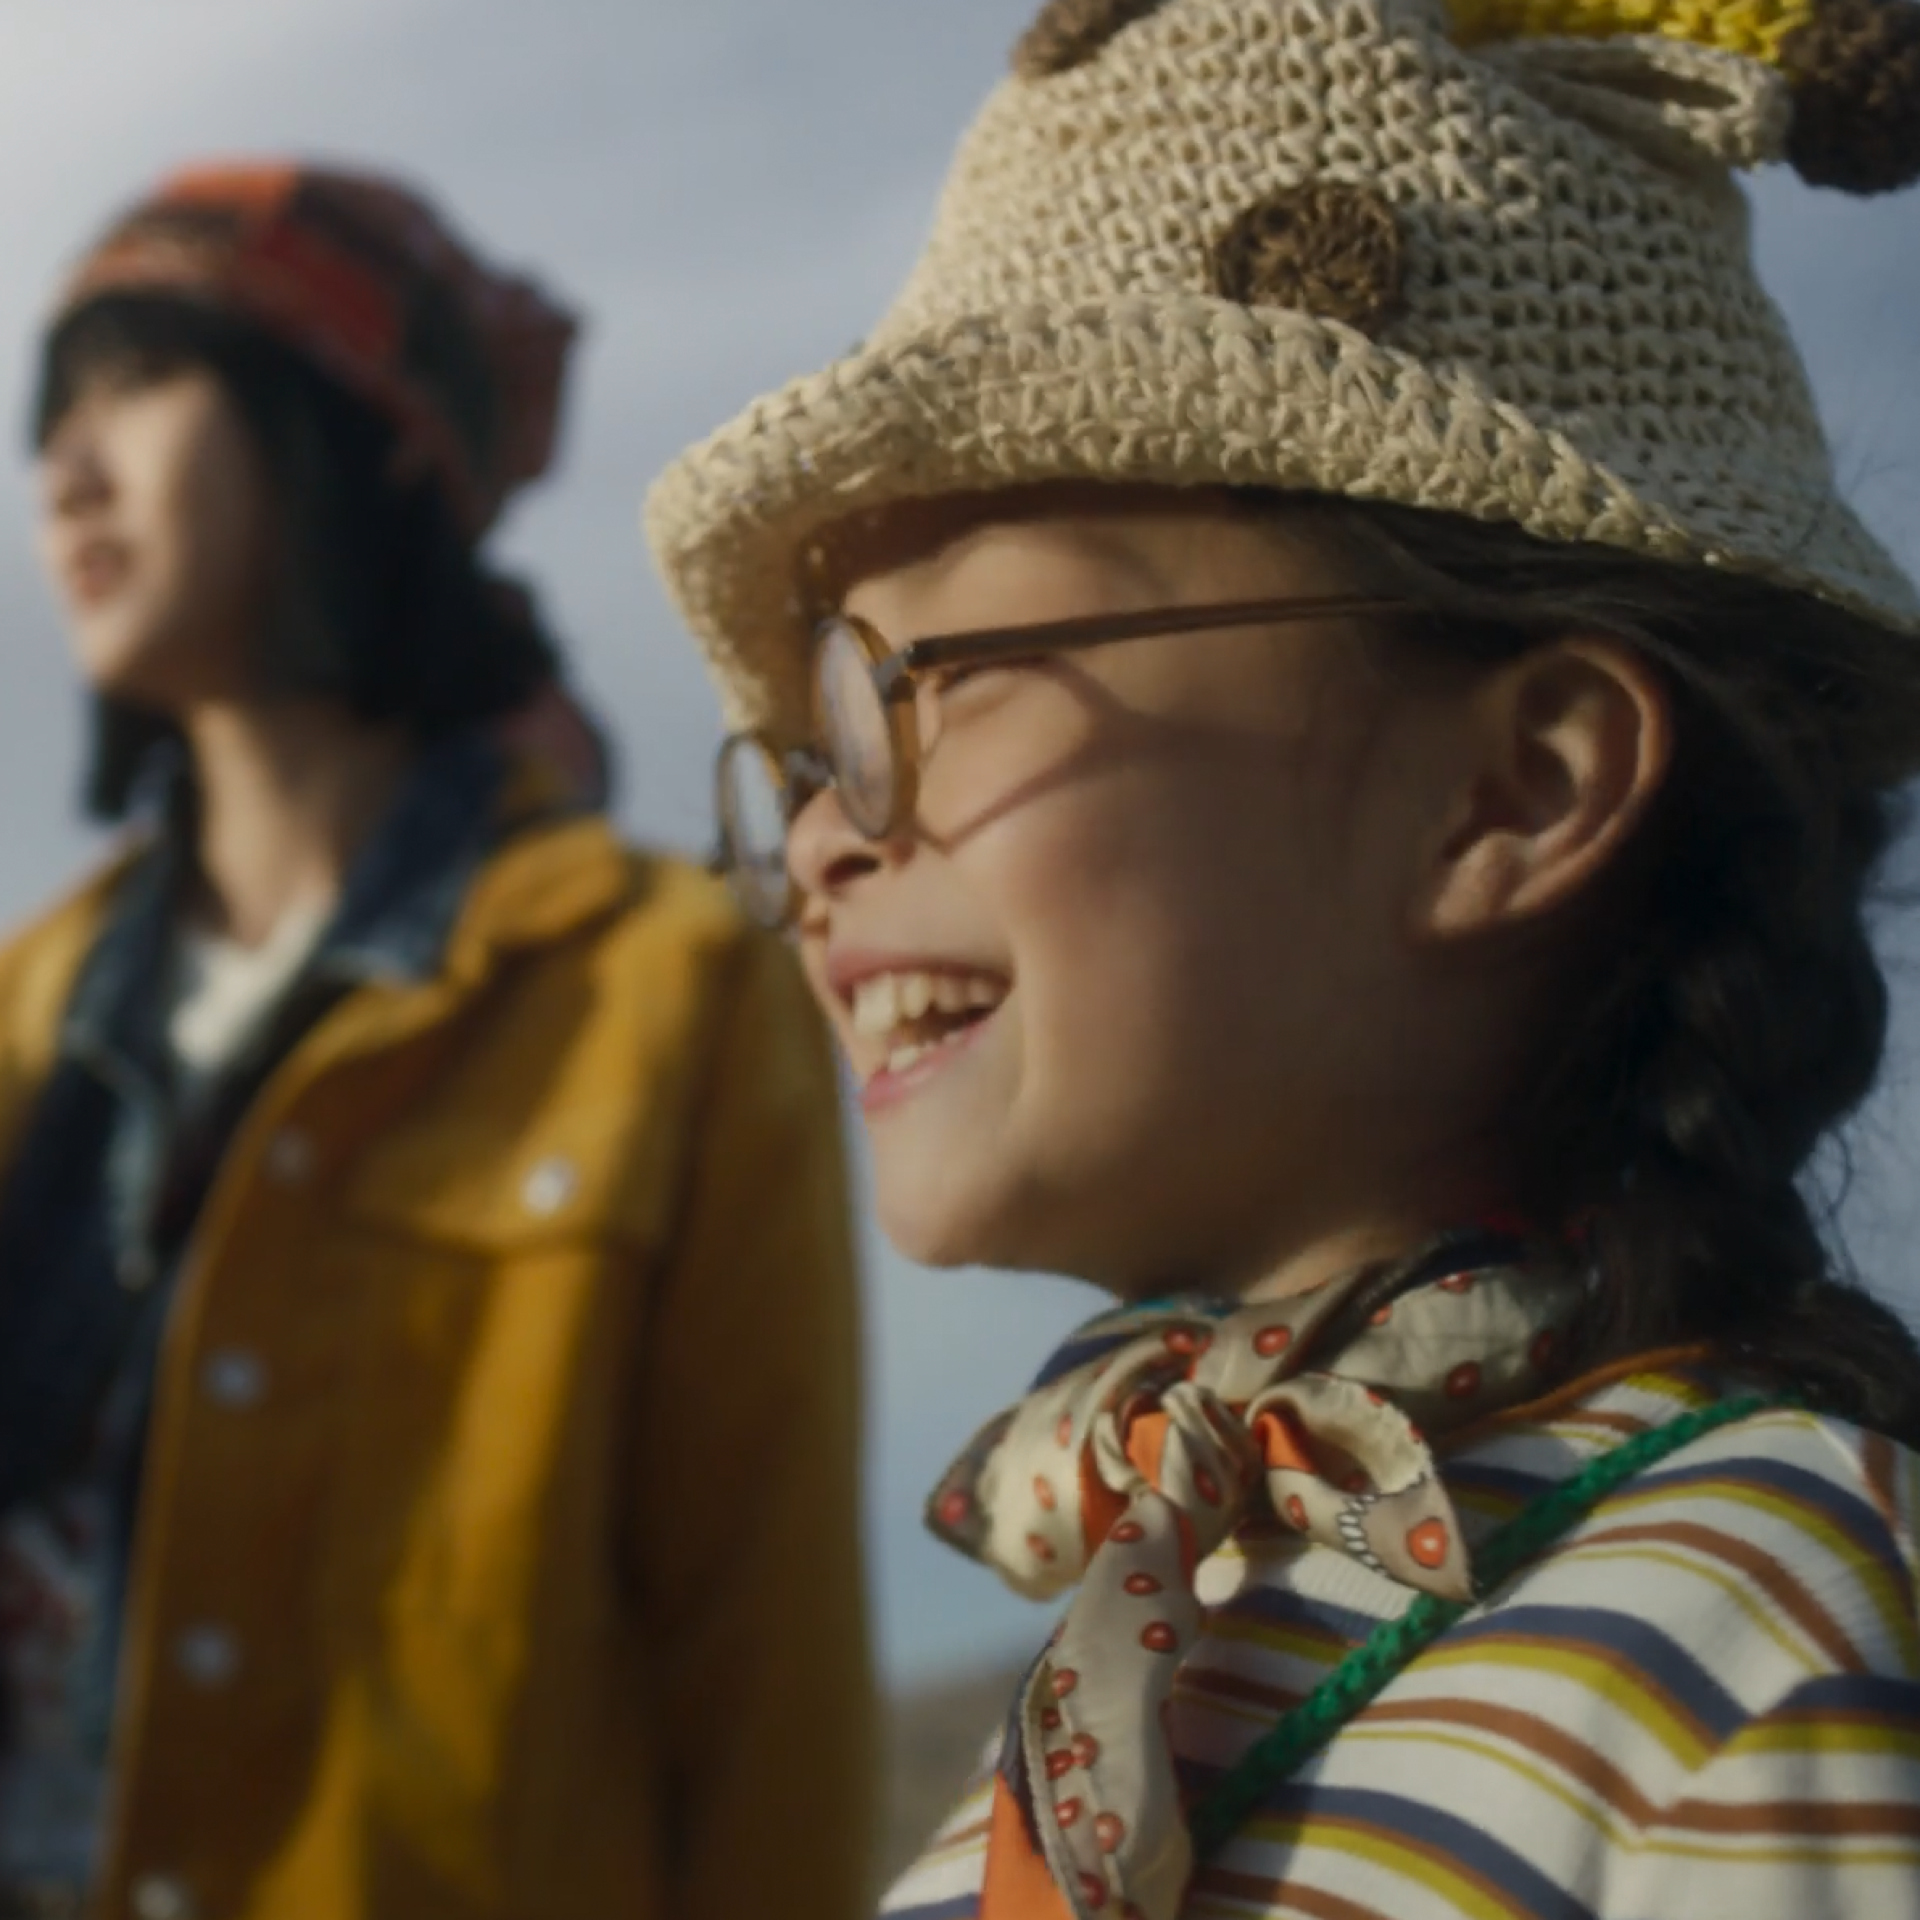 Image of a little smiling girl with glasses wearing a cap. You can see other people in the background.